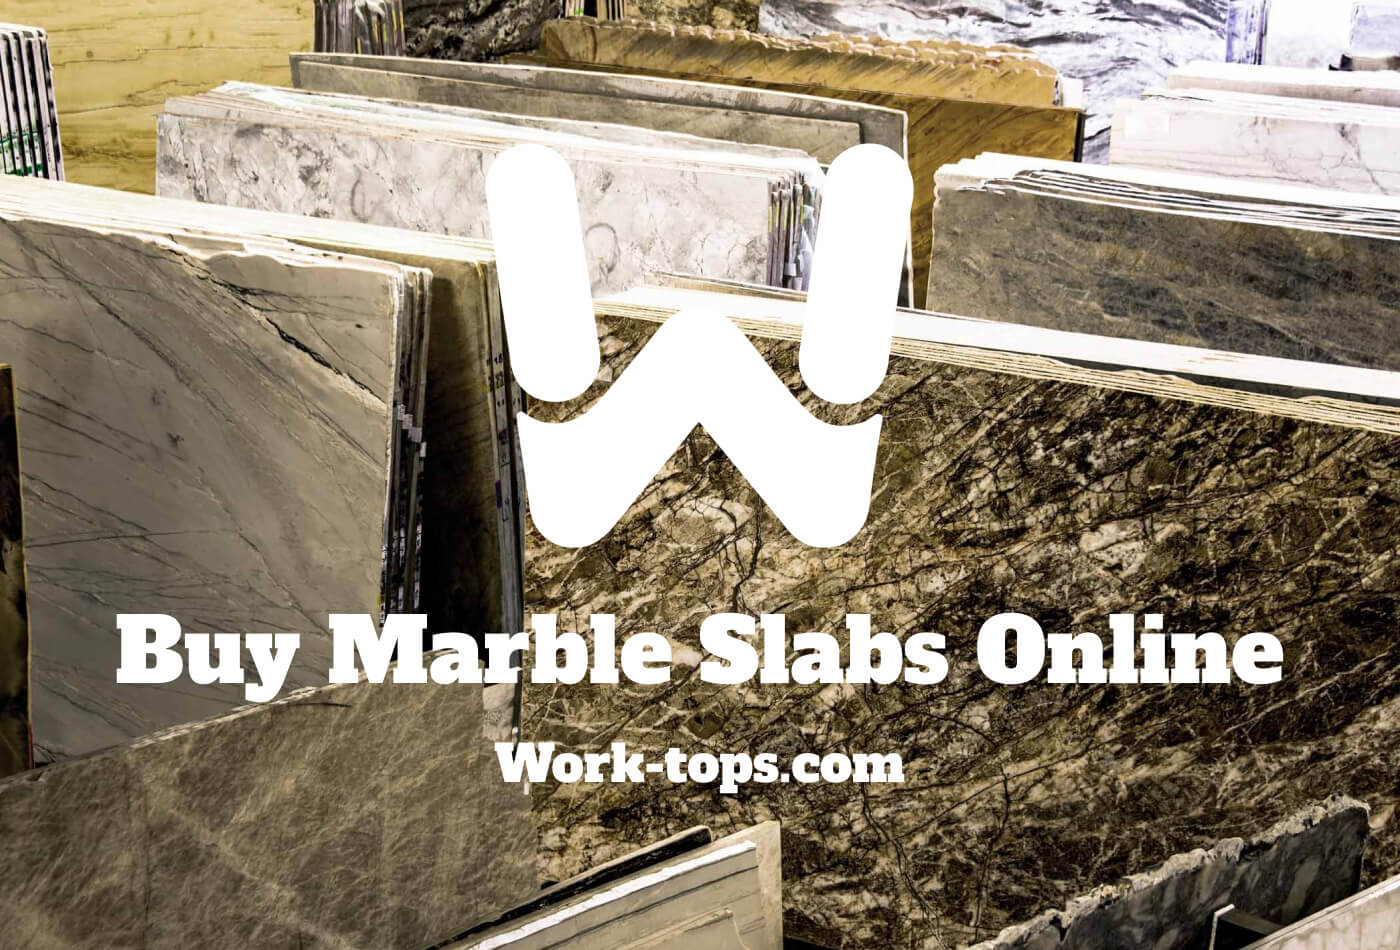 Trusted Site to Buy Marble Slabs Online - Work-tops